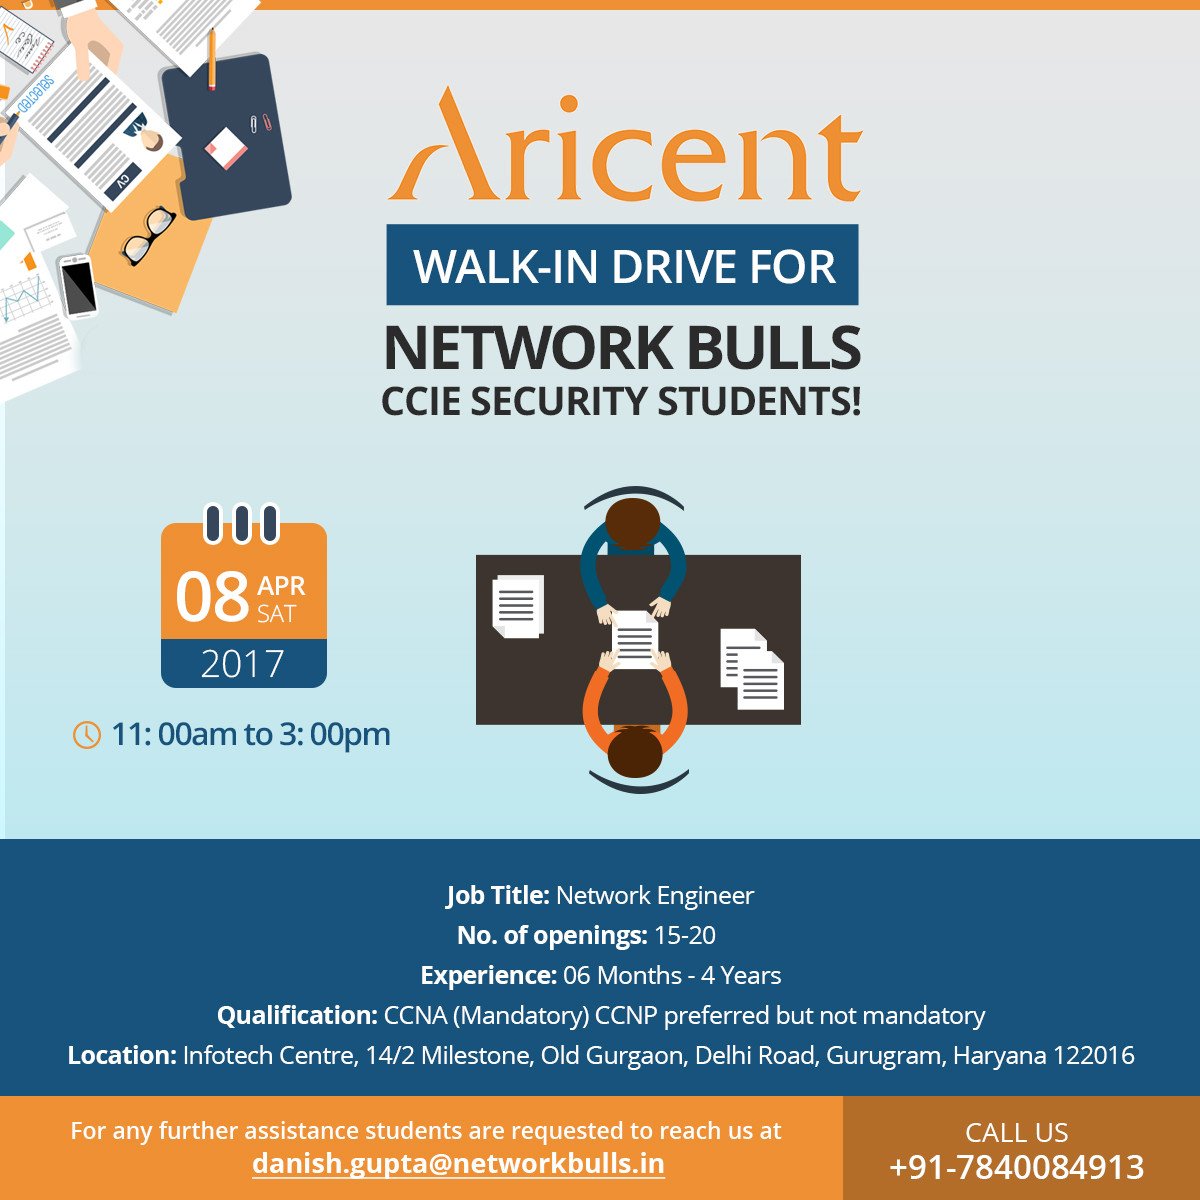 #BigNews - Aricent Walk-in Drive for Network Bulls CCIE Security Students